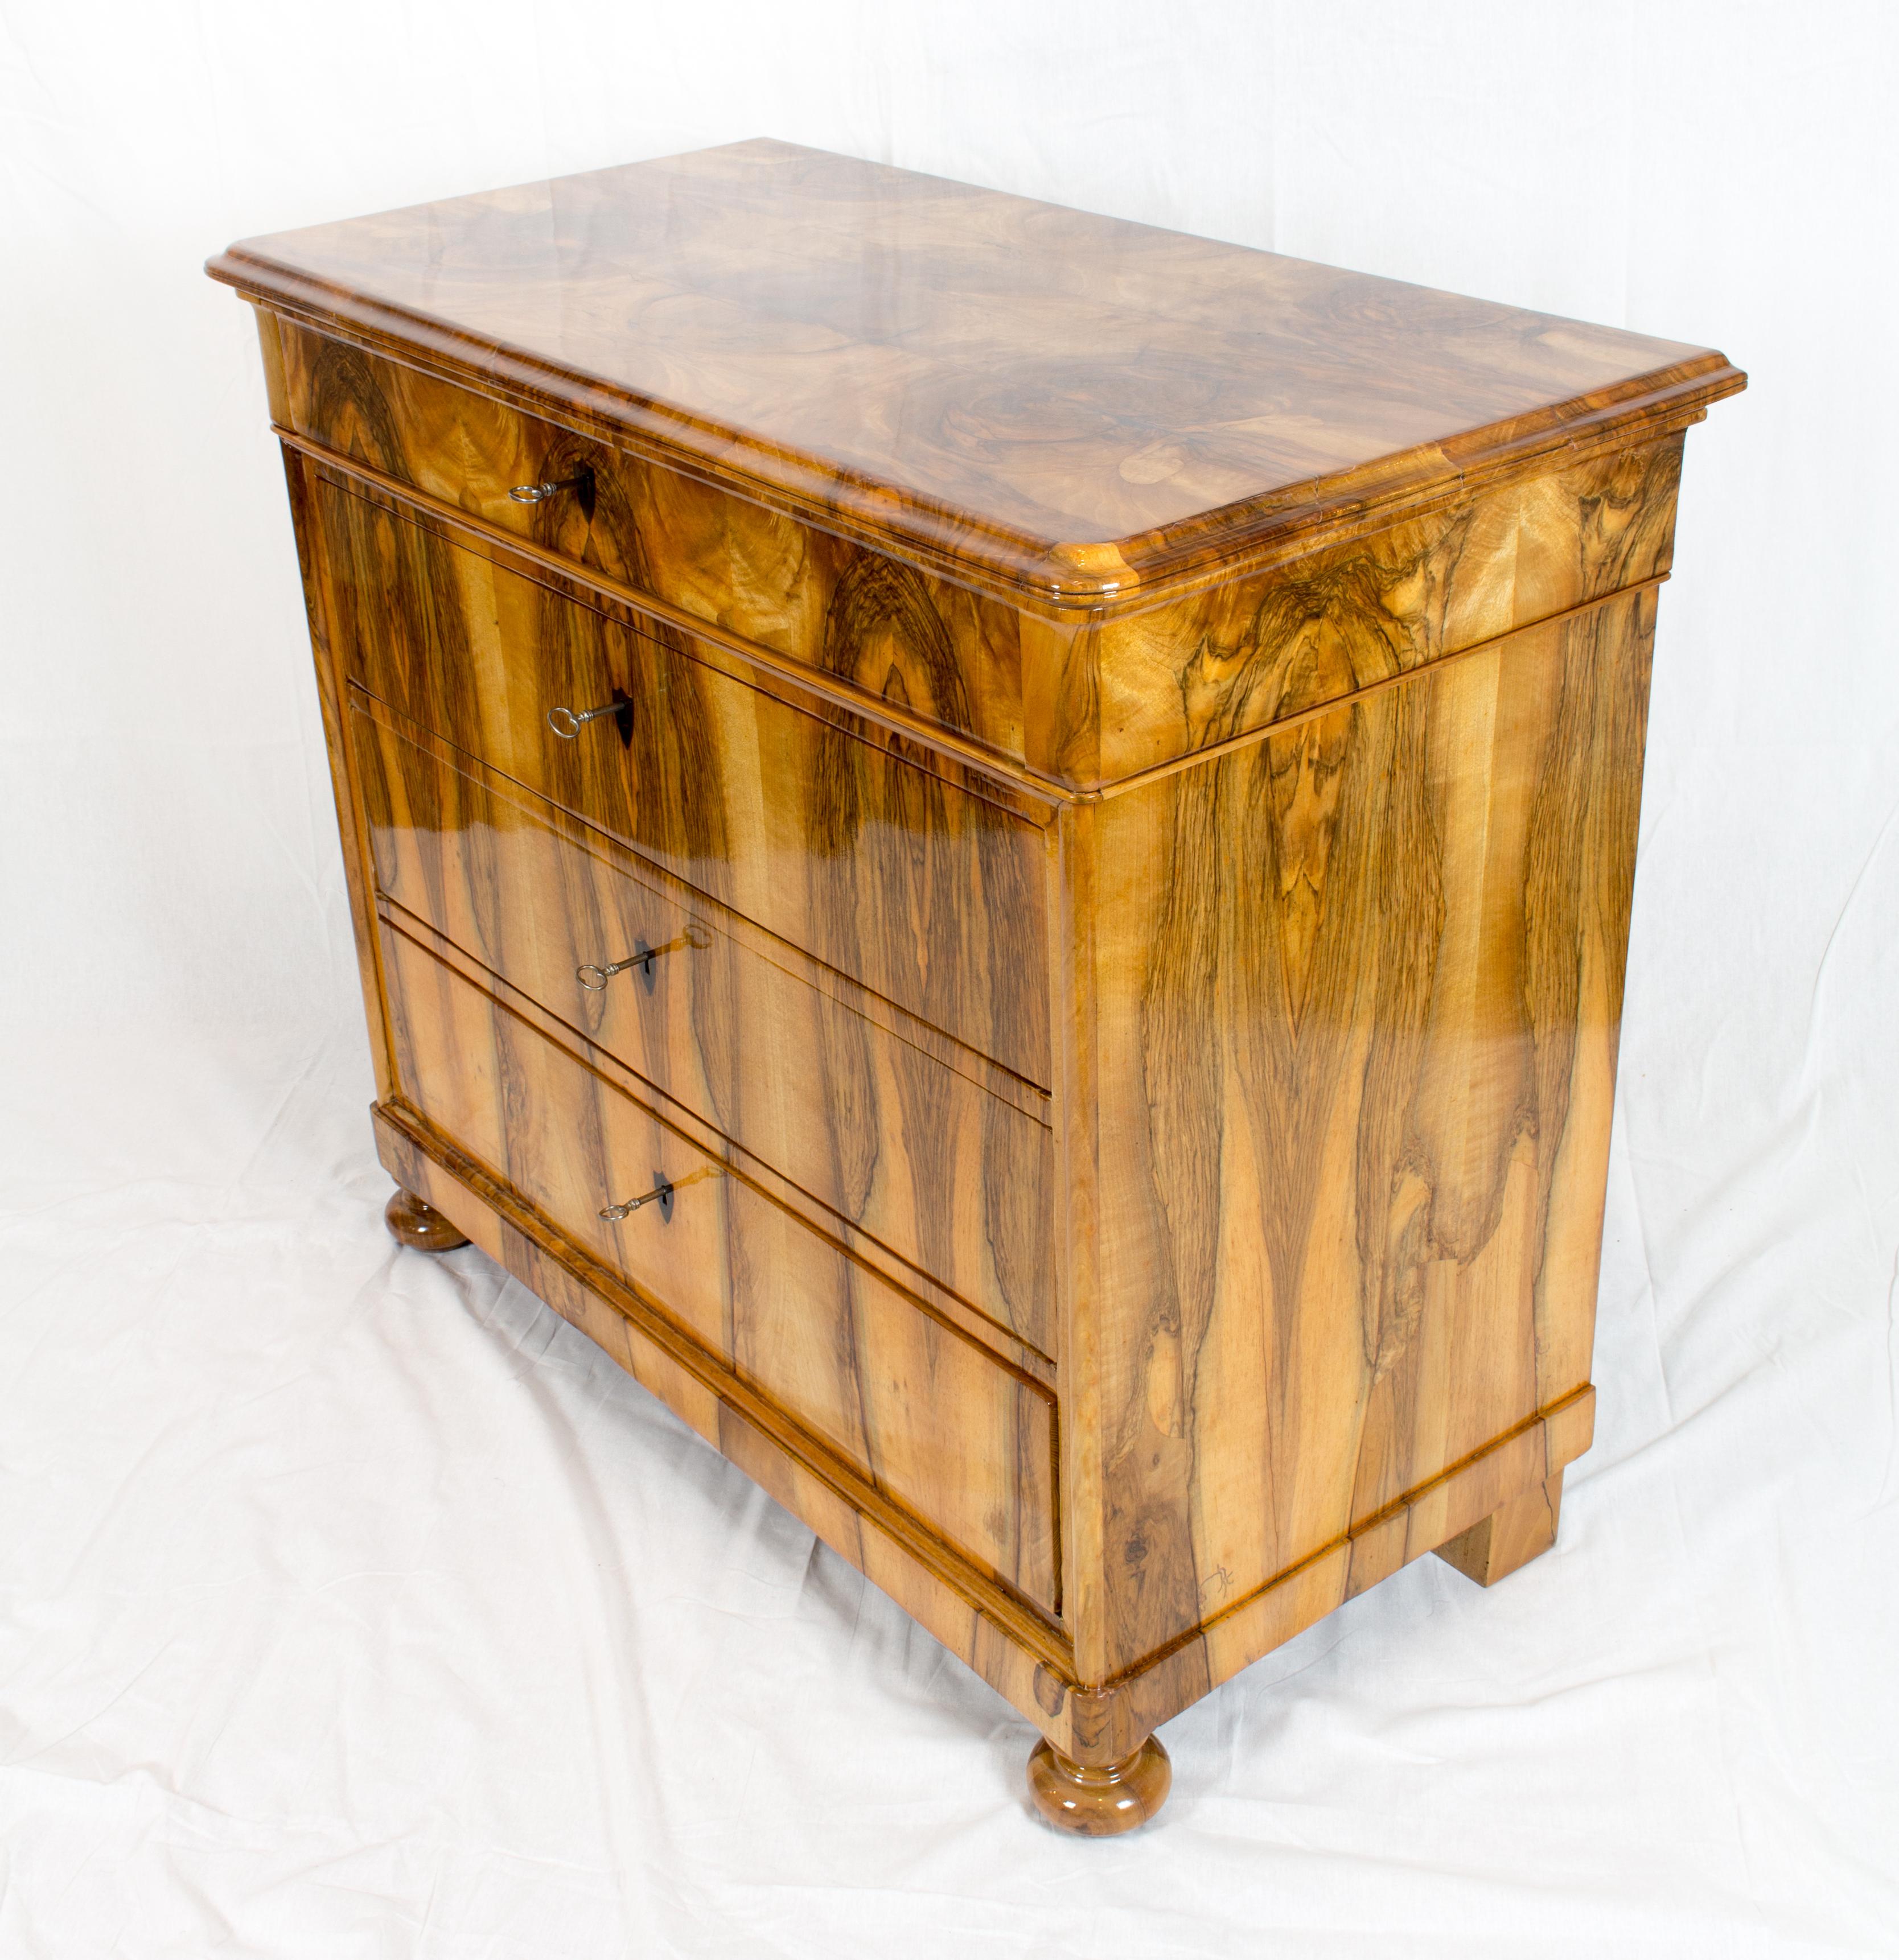 Very nice big Biedermeier chest of drawers with four drawers. A wonderful walnut veneer picture on a pine wood corpus. In very good restored condition.